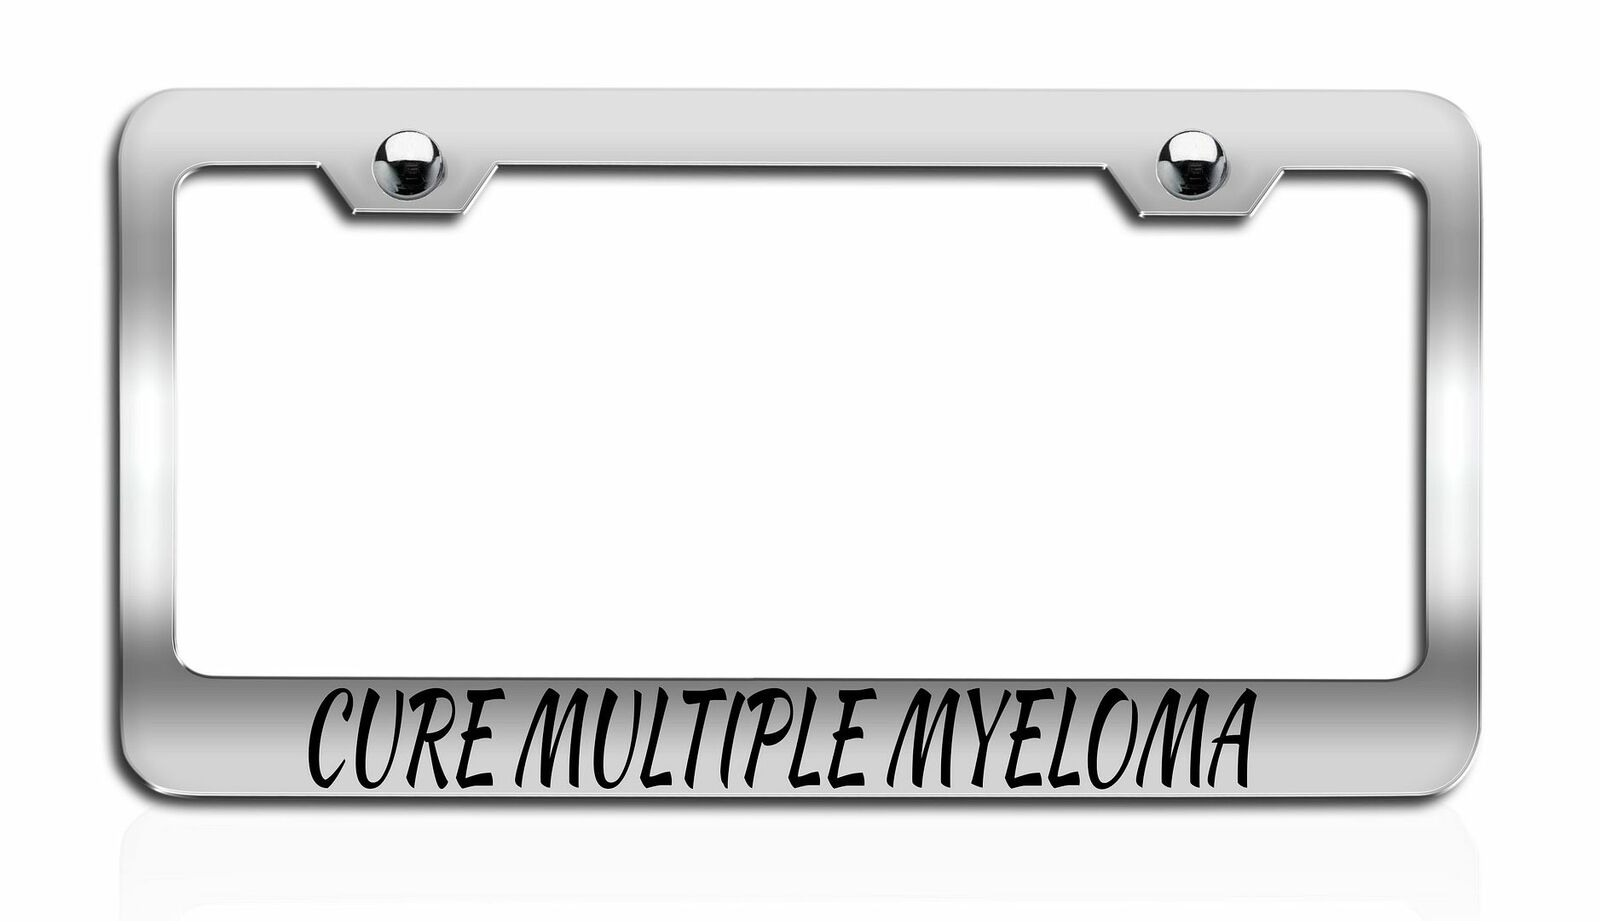 CURE MULTIPLE MYELOMA Causes Steel License Plate Frame Car SUV